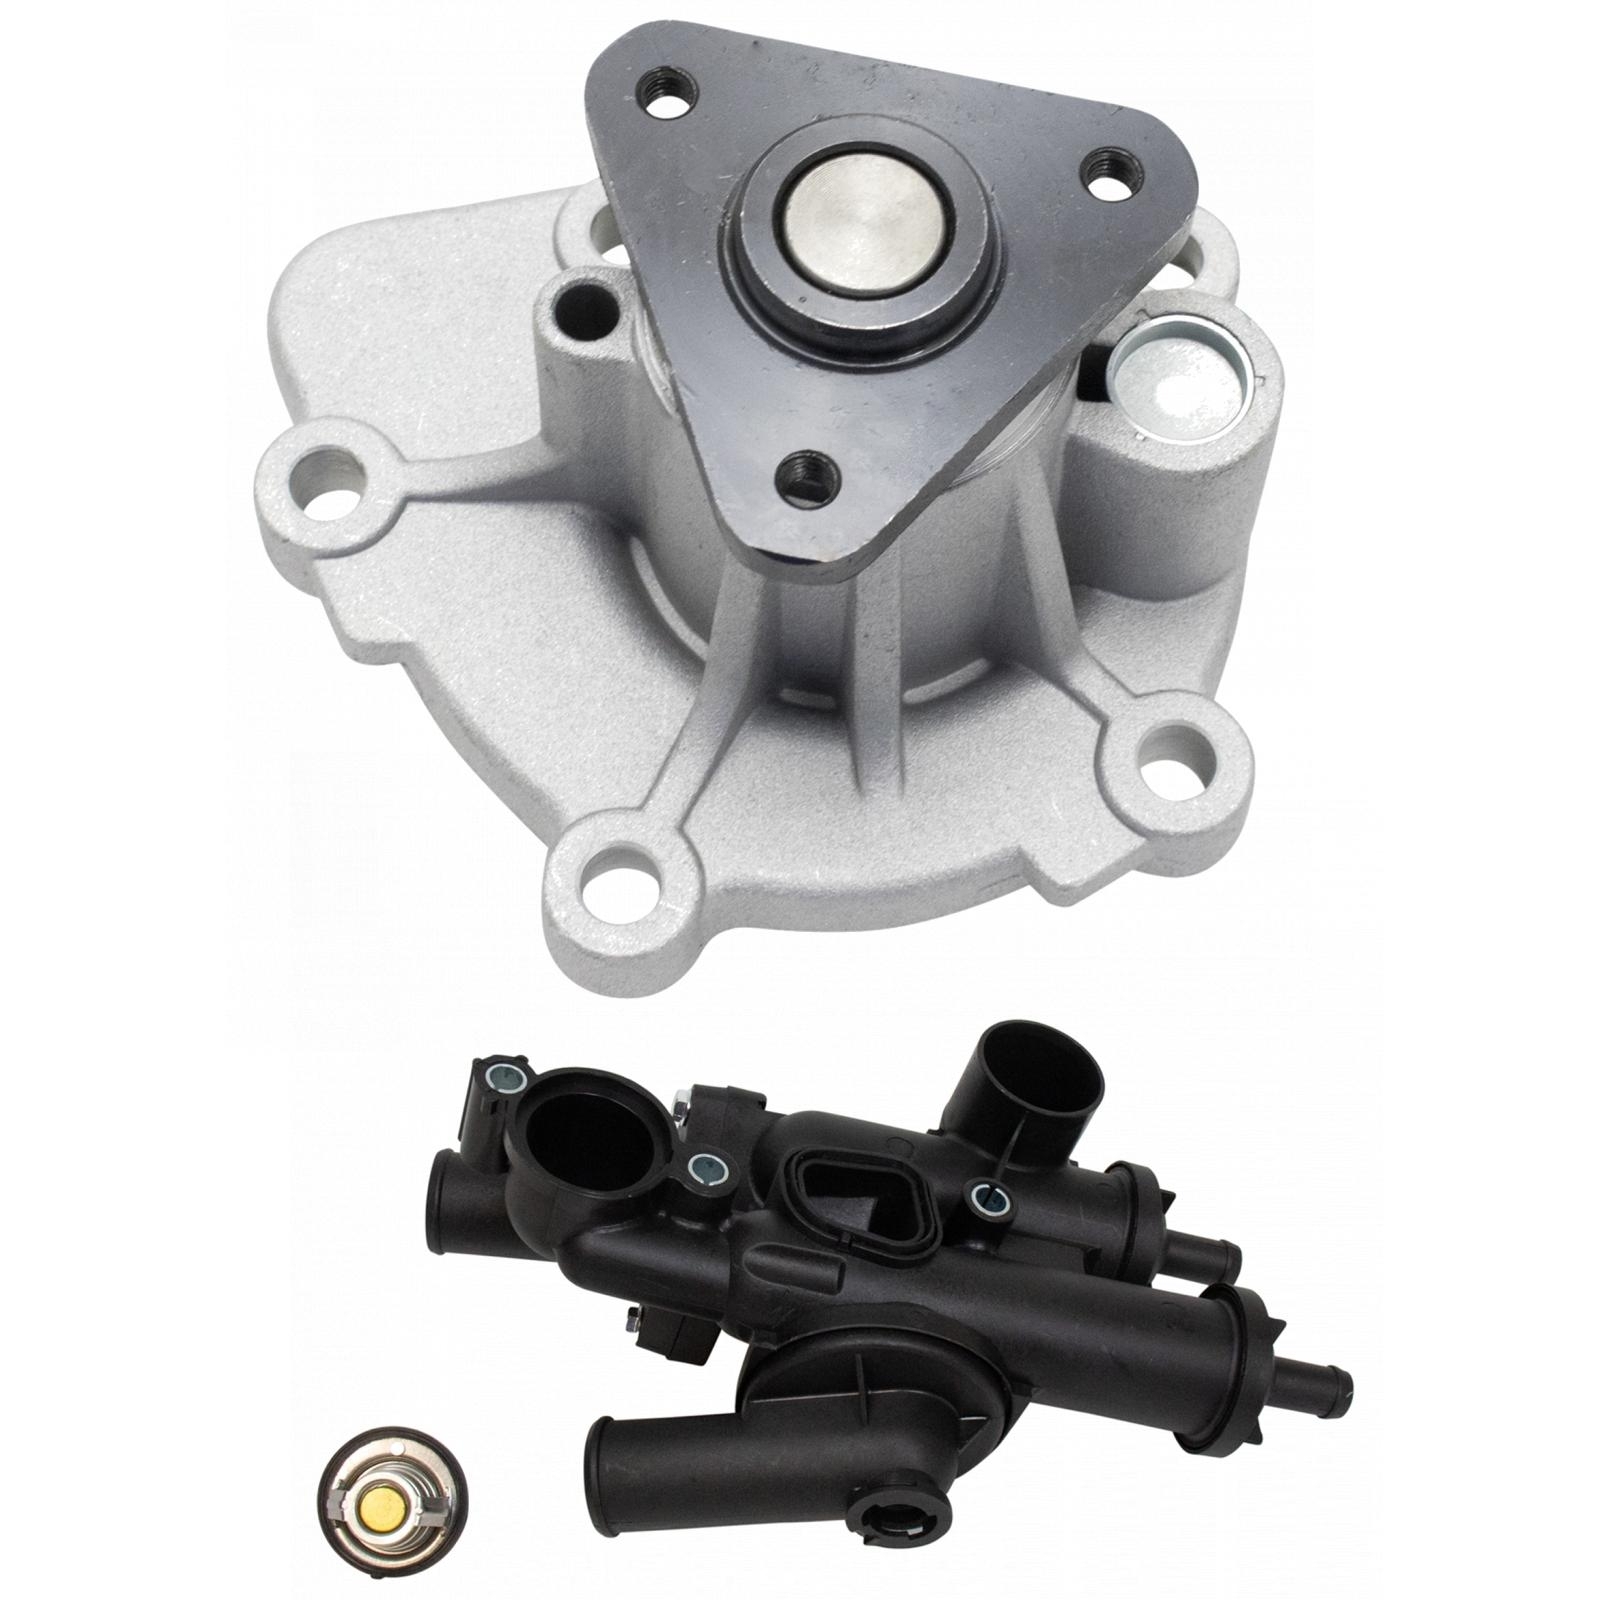 Trq Engine Water Pump And Thermostat Assembly For 07-17 Compass 09-12 Patriot, HWNV-WPA92900